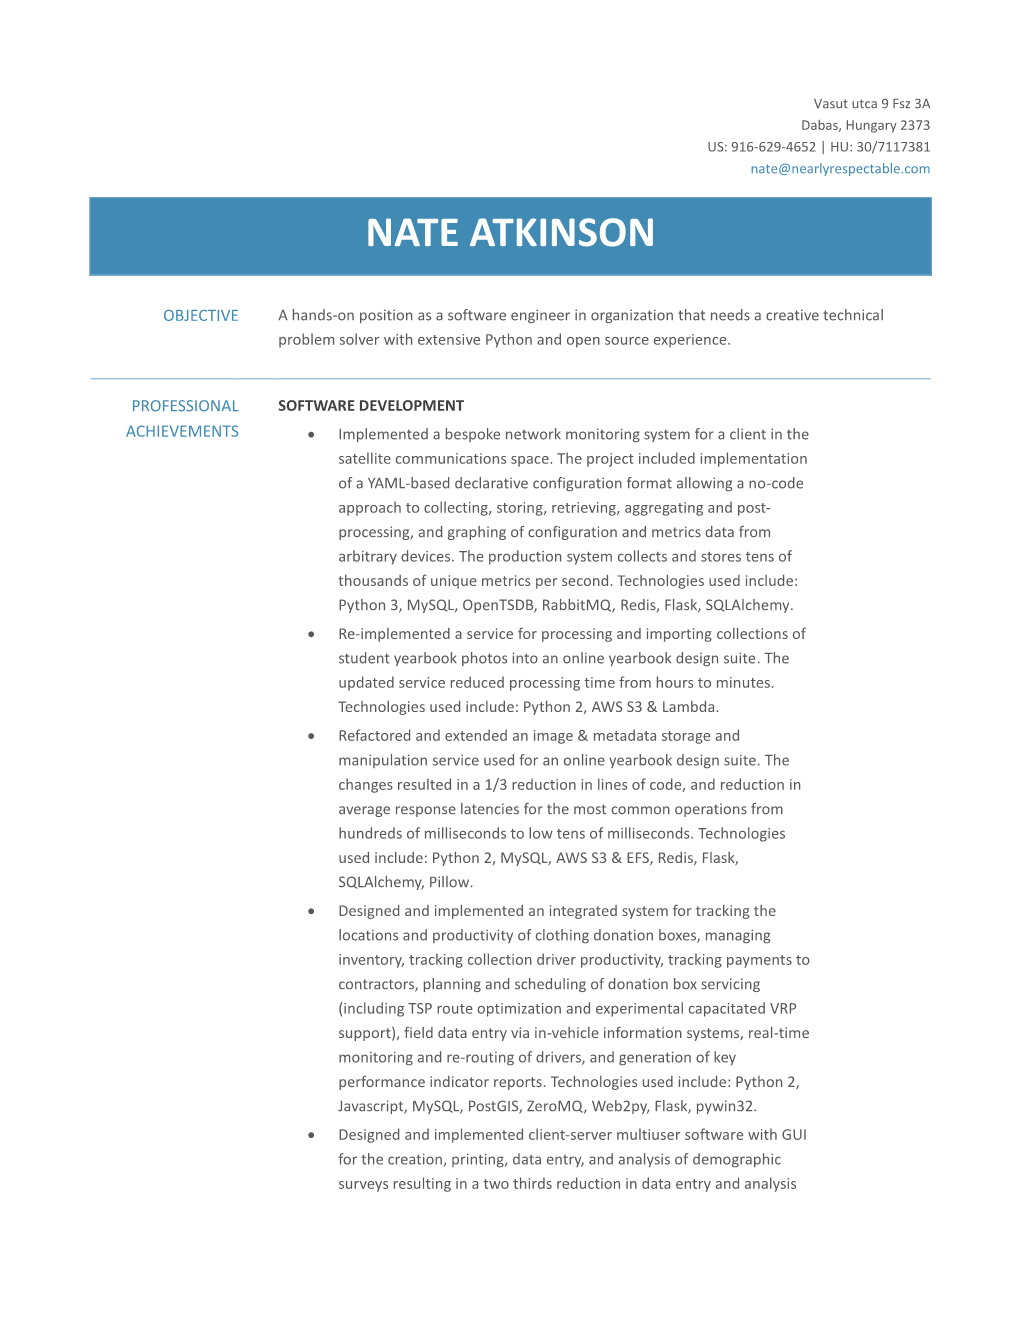 Nate Atkinson Is Nearlyrespectable.Com